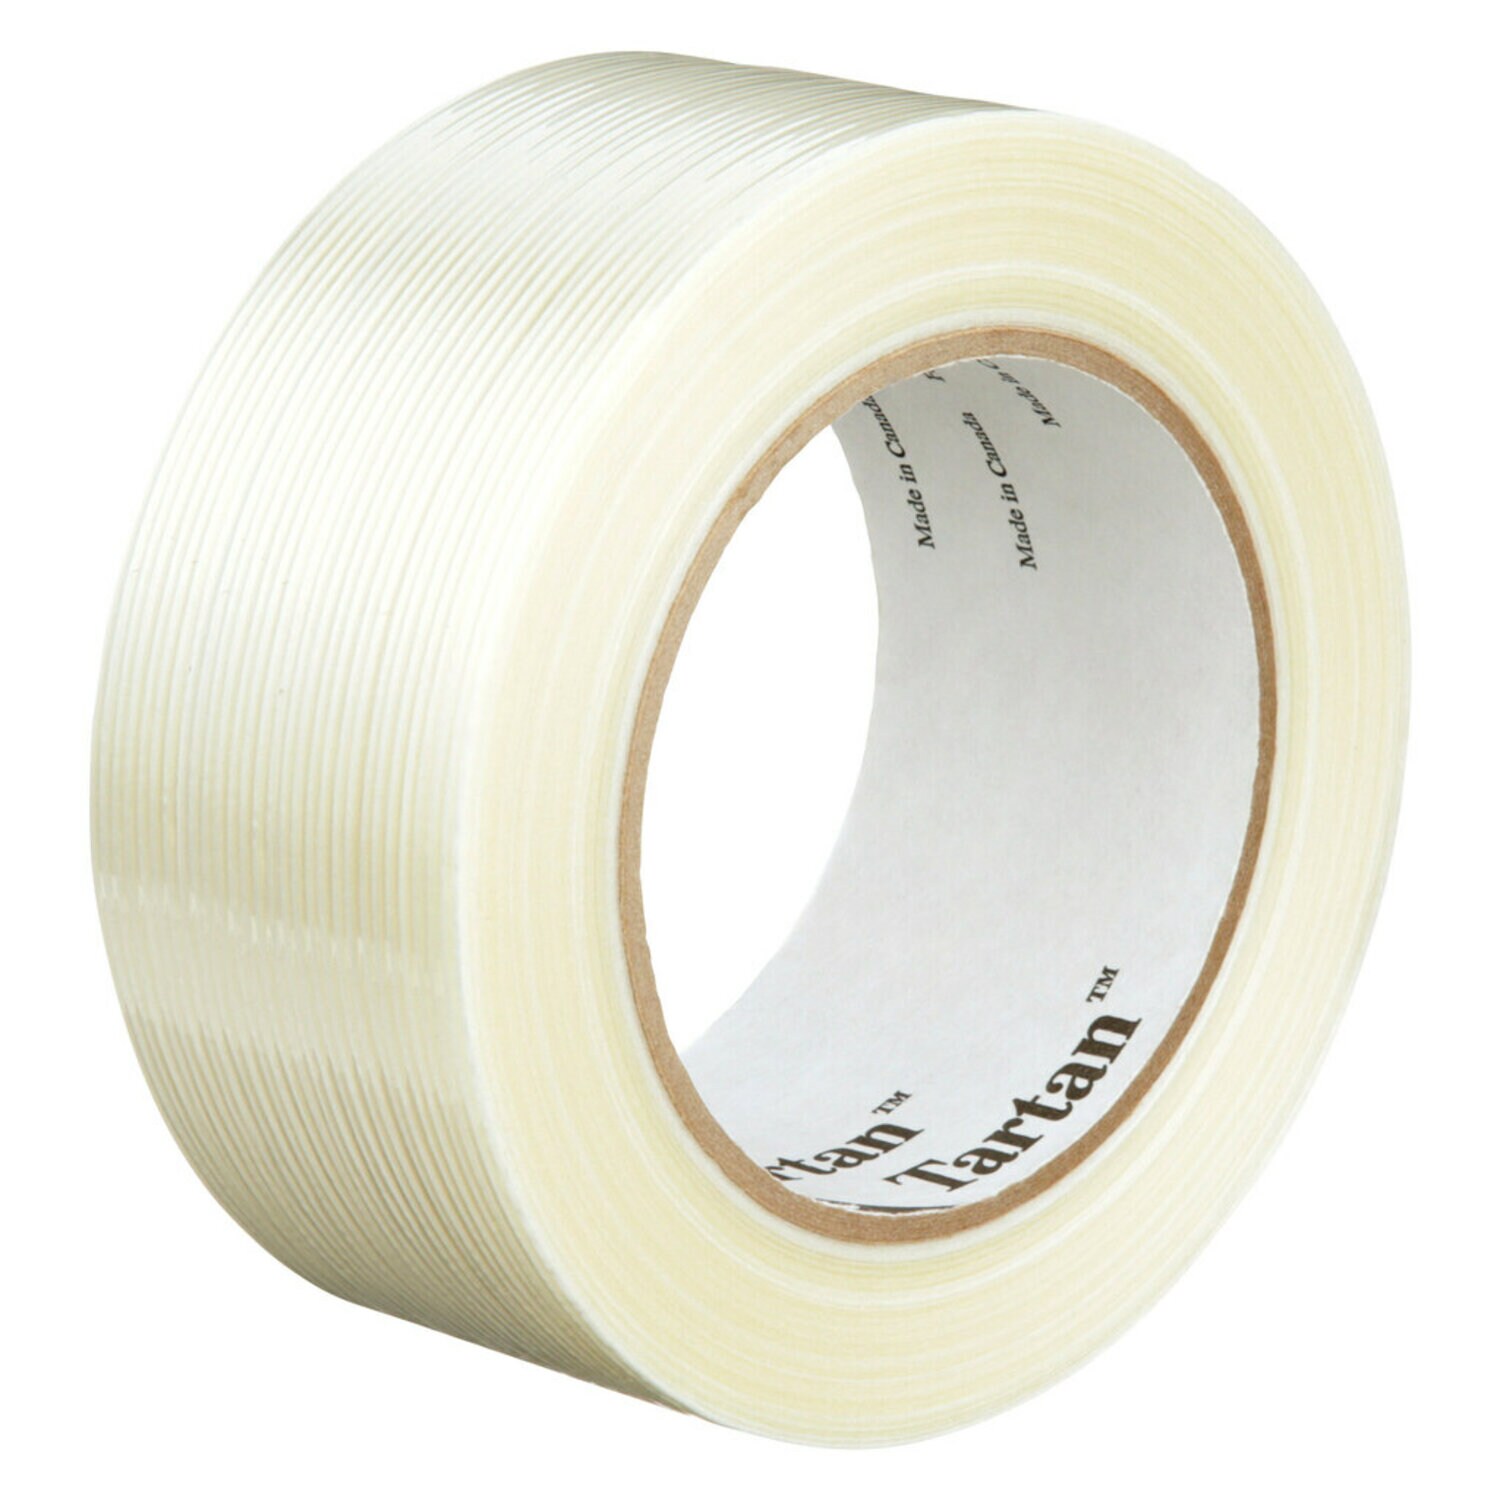 7010375598 - Tartan Filament Tape 8934, Clear, 48 mm x 55 m, 4 mil, 24 rolls per
case, Individually Wrapped Conveniently Packaged